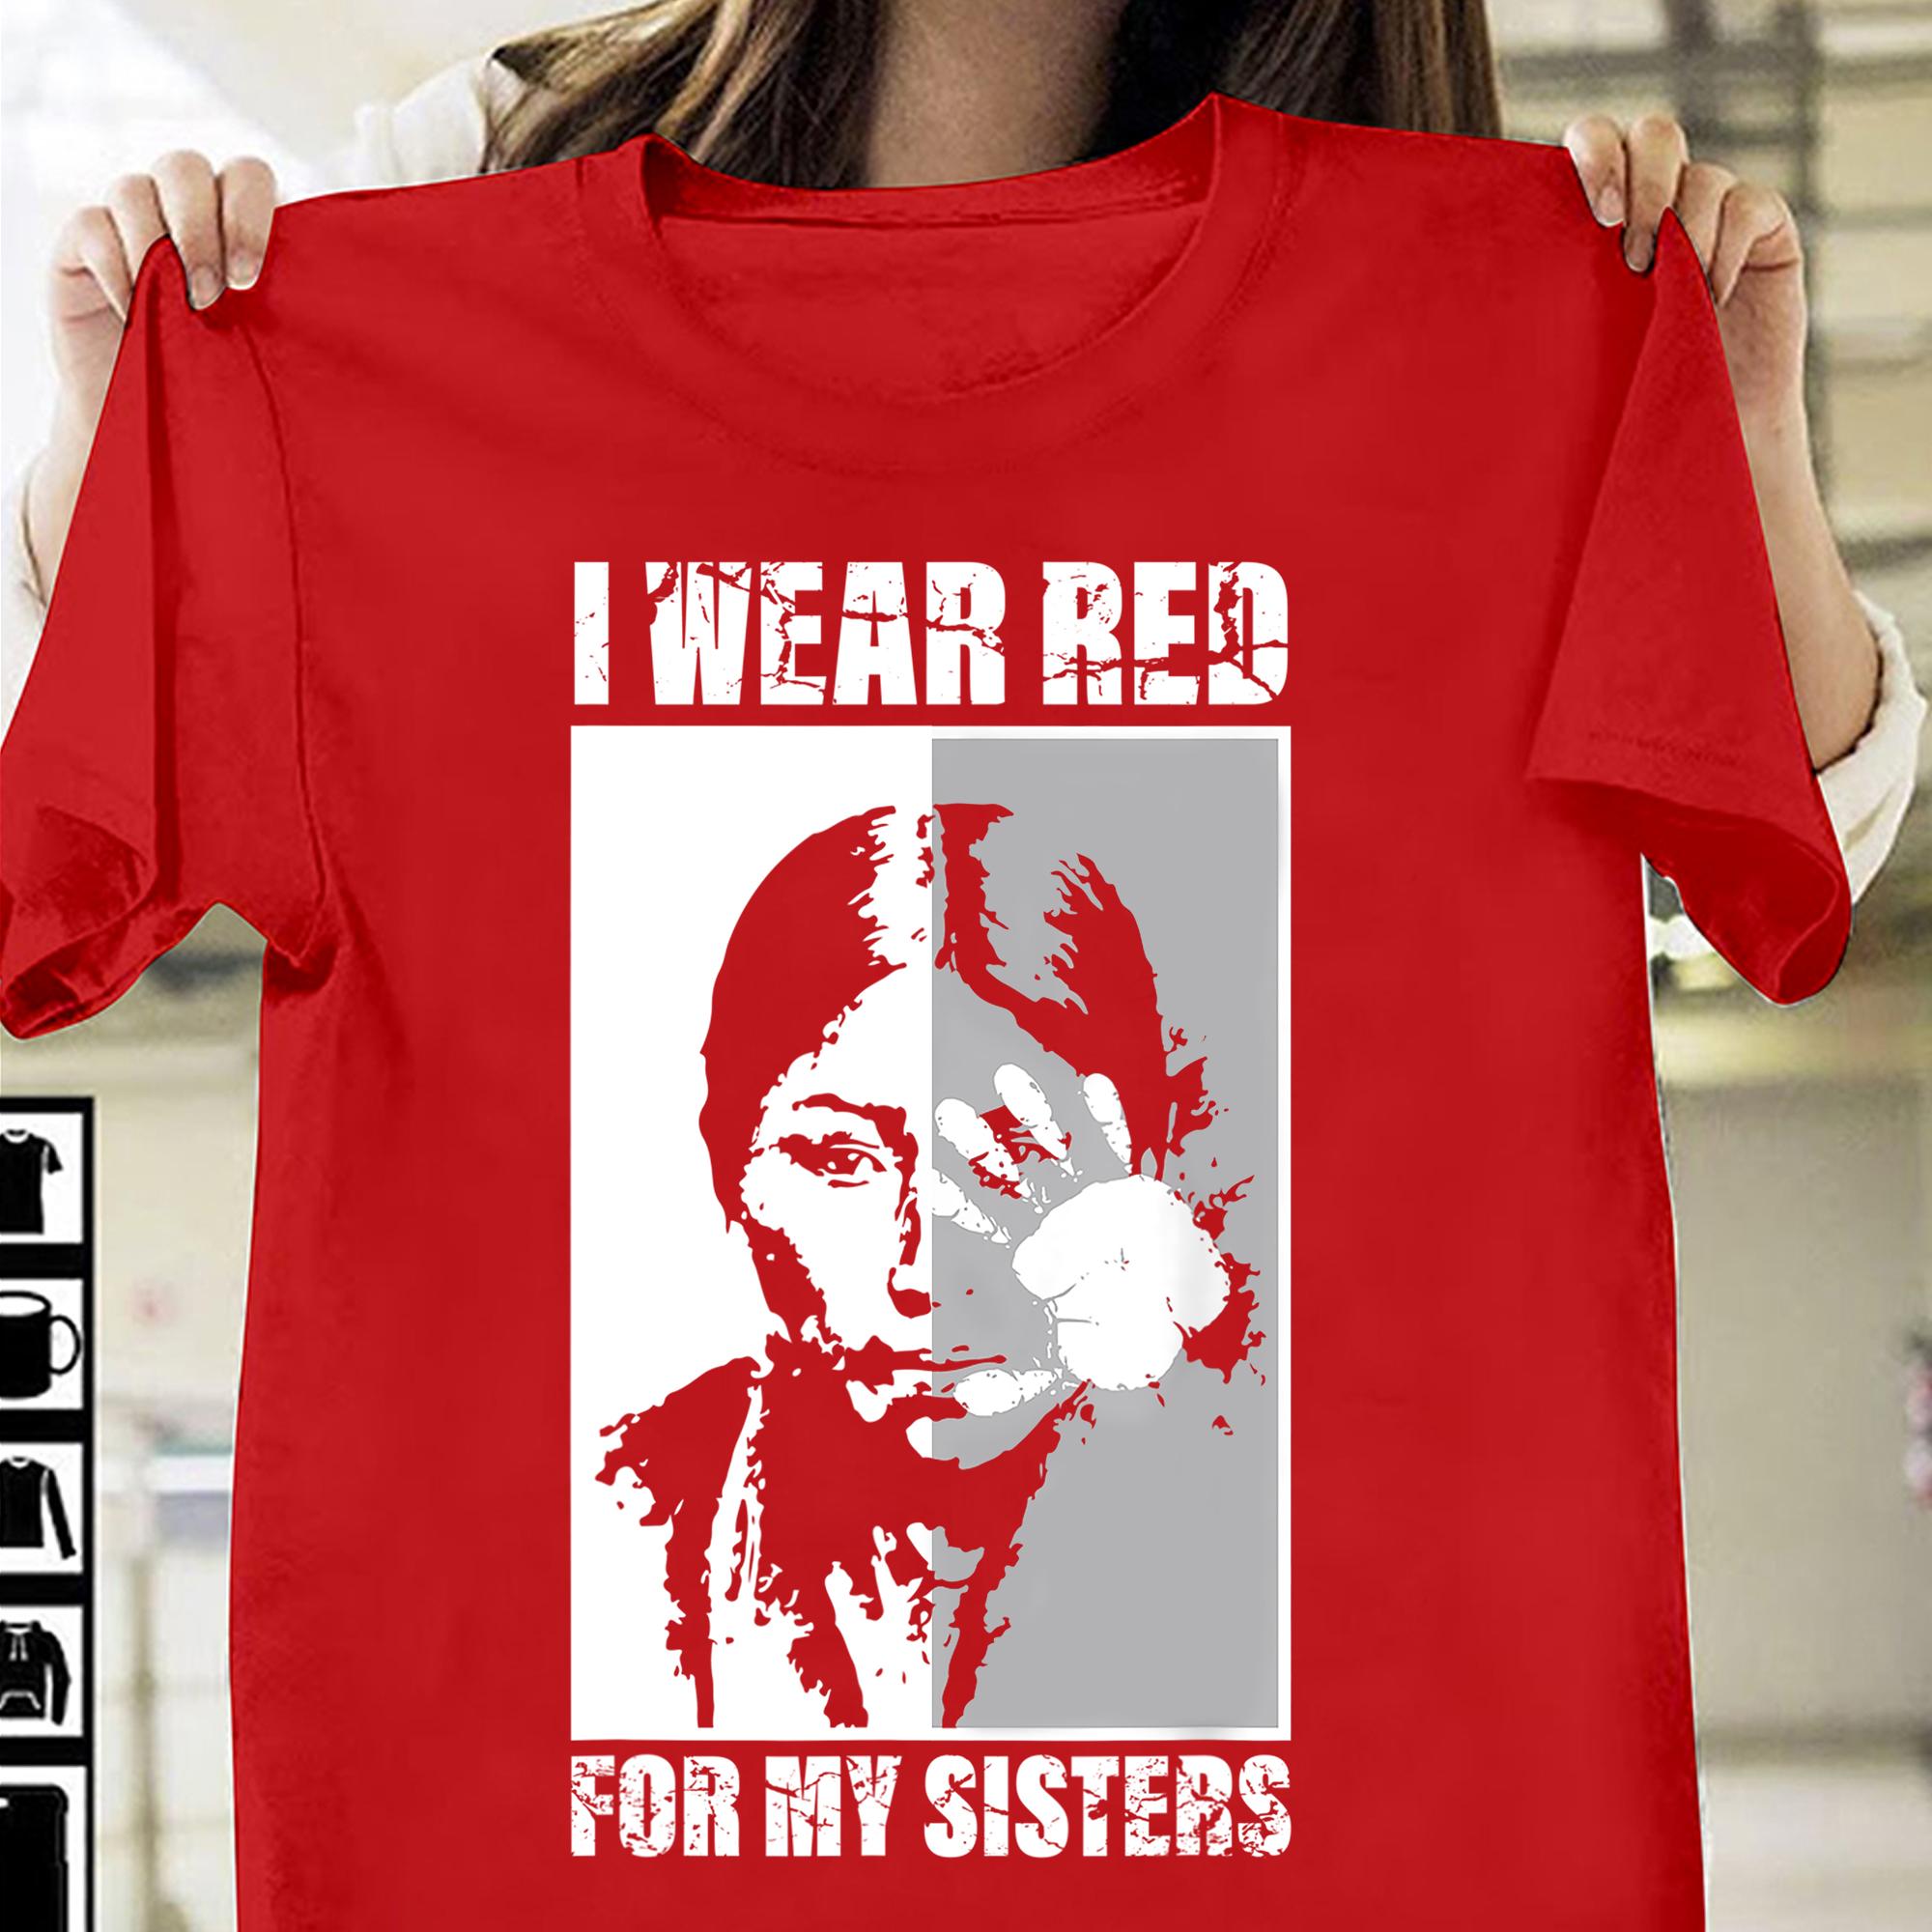 I wear red for my sisters - Native American woman, Native American sisters, Native American people gift